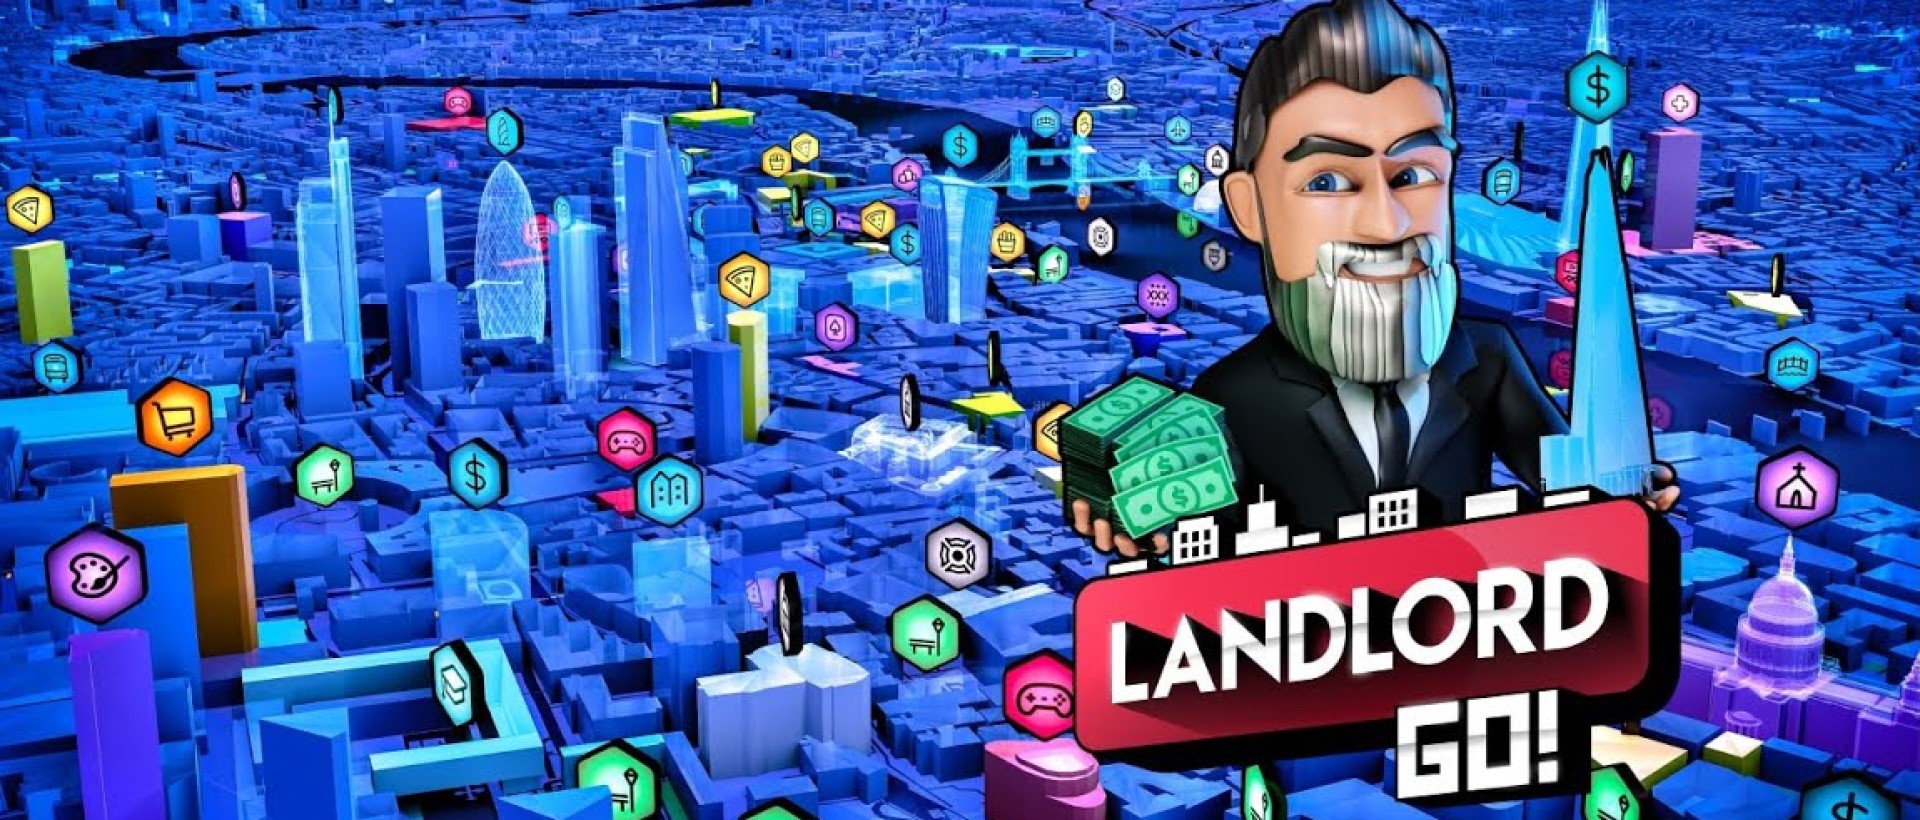 Download & Play Landlord GO - The Business Game on PC & Mac with NoxPlayer (Emulator)